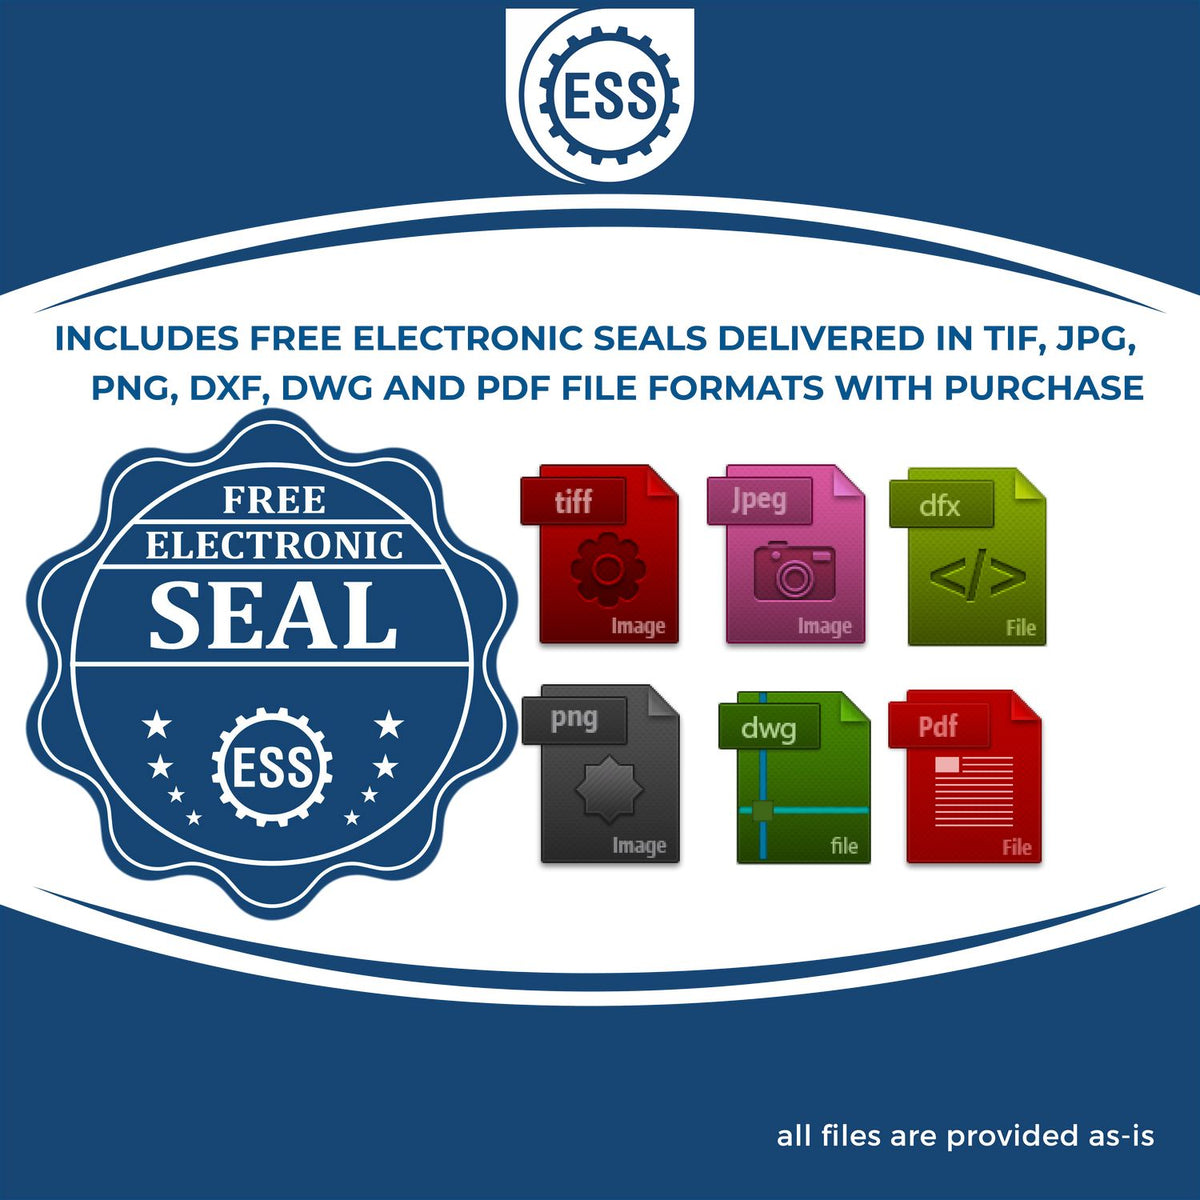 An infographic for the free electronic seal for the Extended Long Reach Indiana Architect Seal Embosser illustrating the different file type icons such as DXF, DWG, TIF, JPG and PNG.